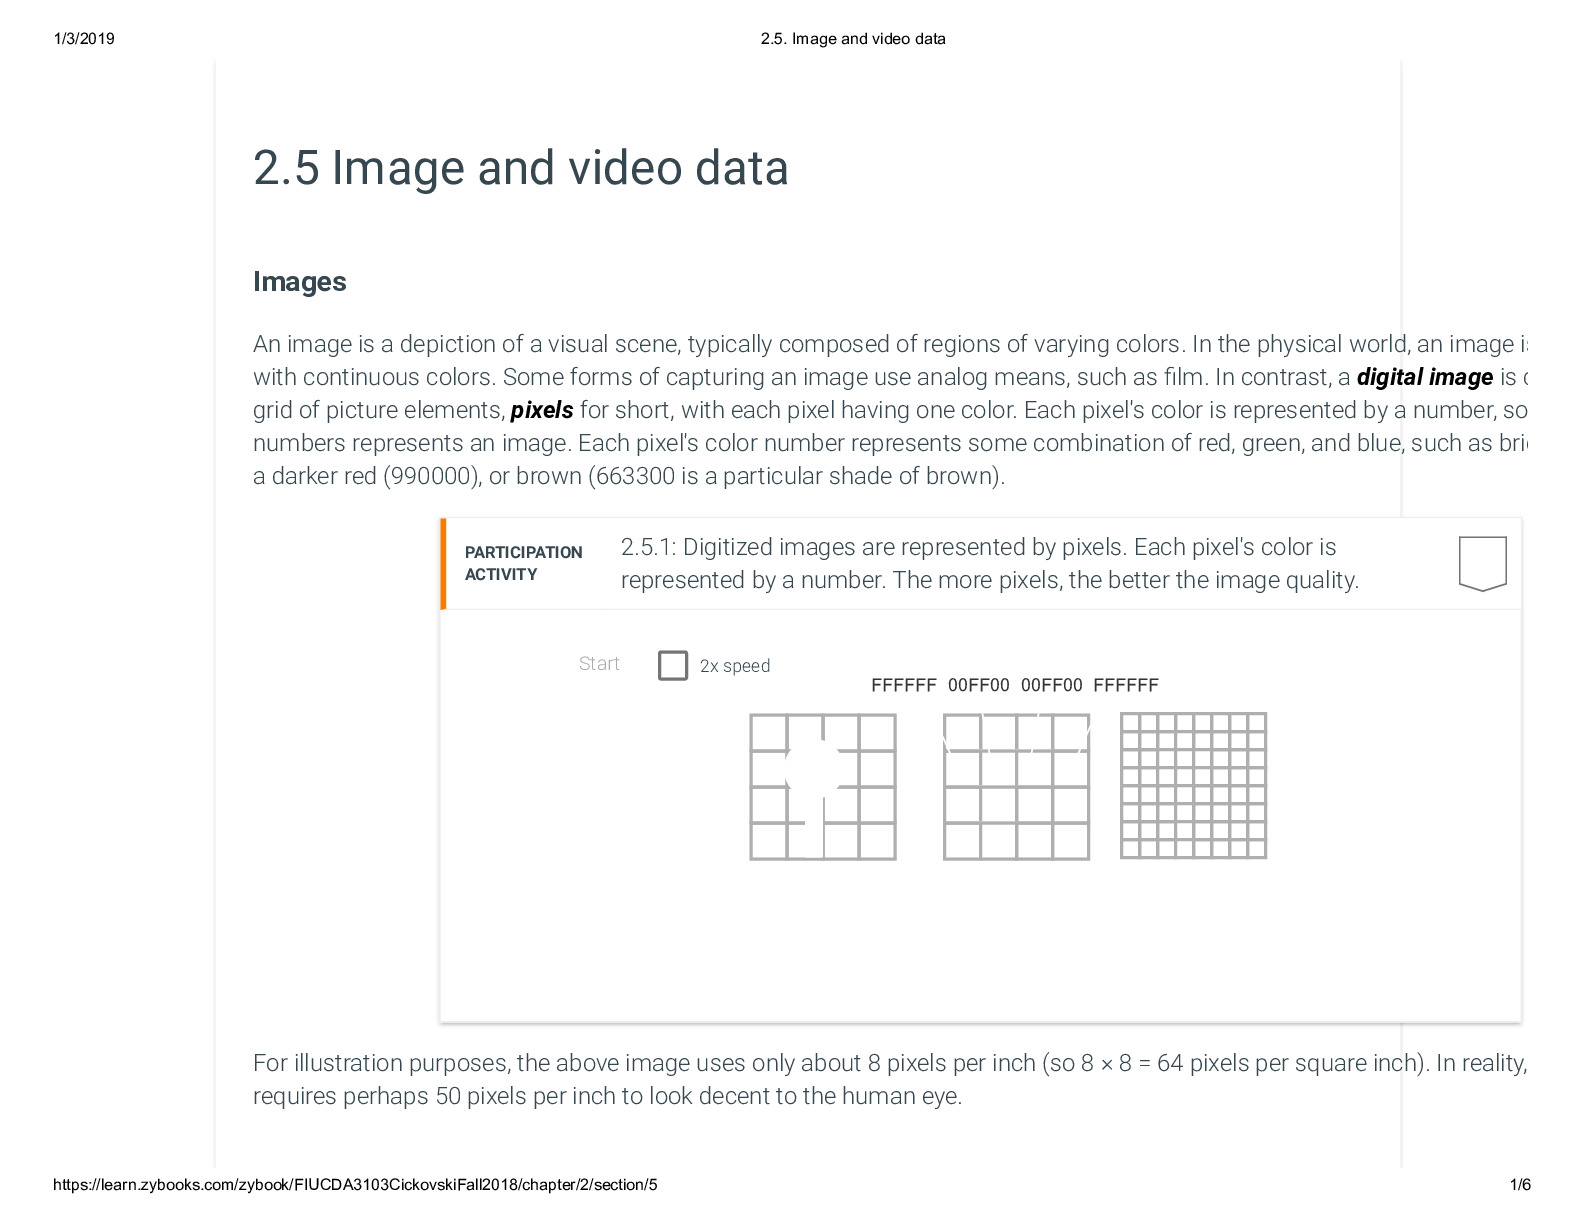 2.5. Image and video data